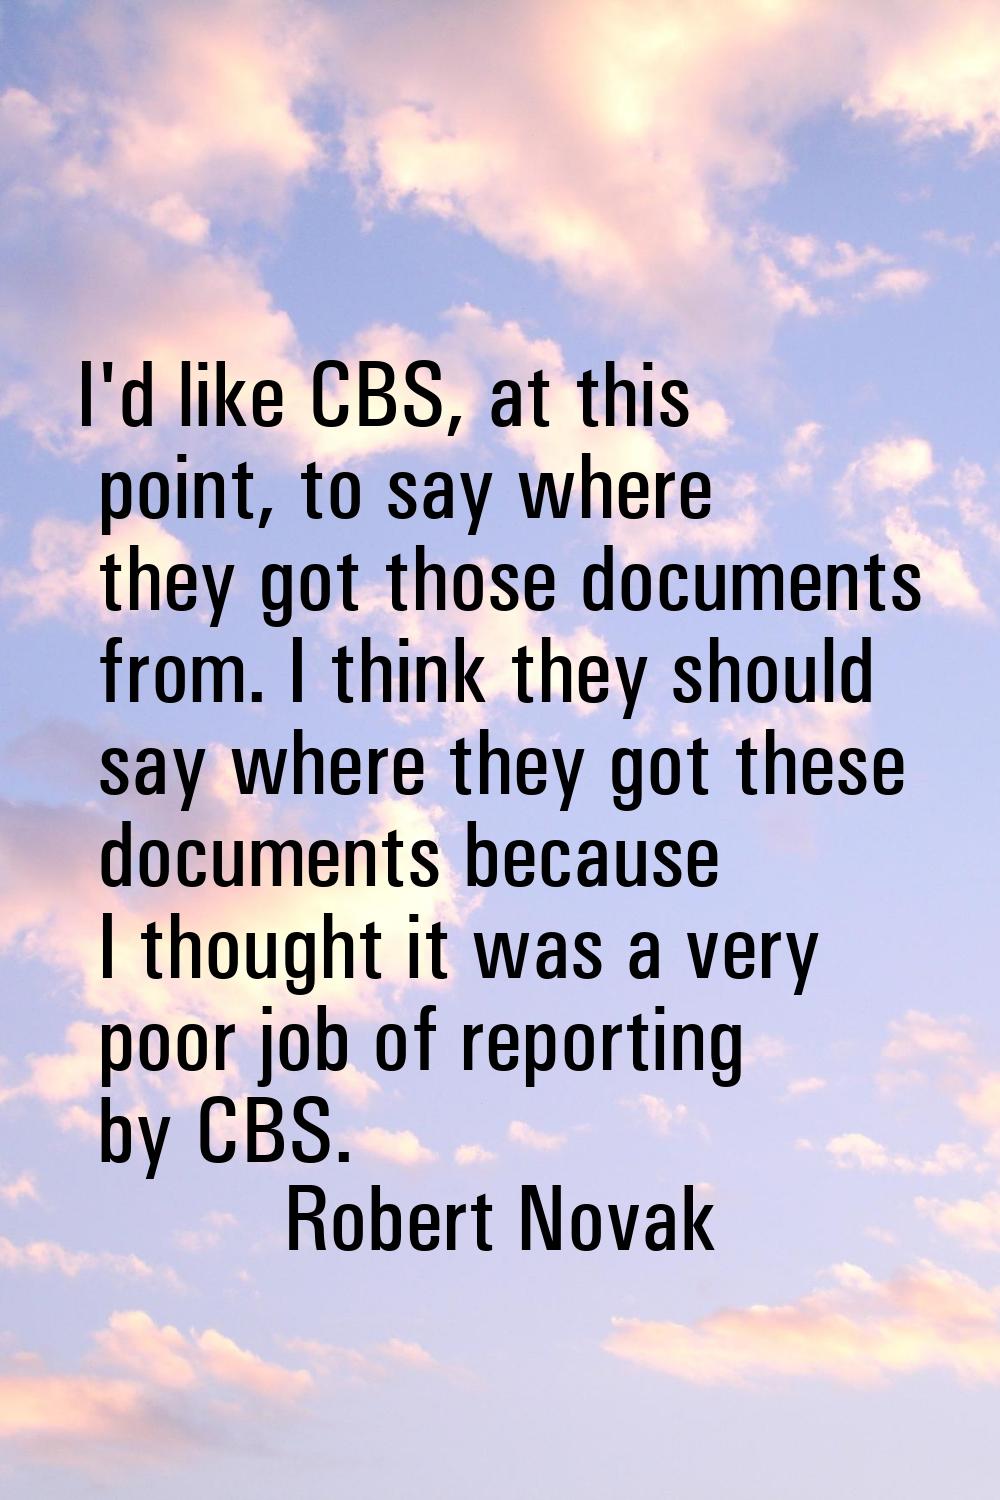 I'd like CBS, at this point, to say where they got those documents from. I think they should say wh